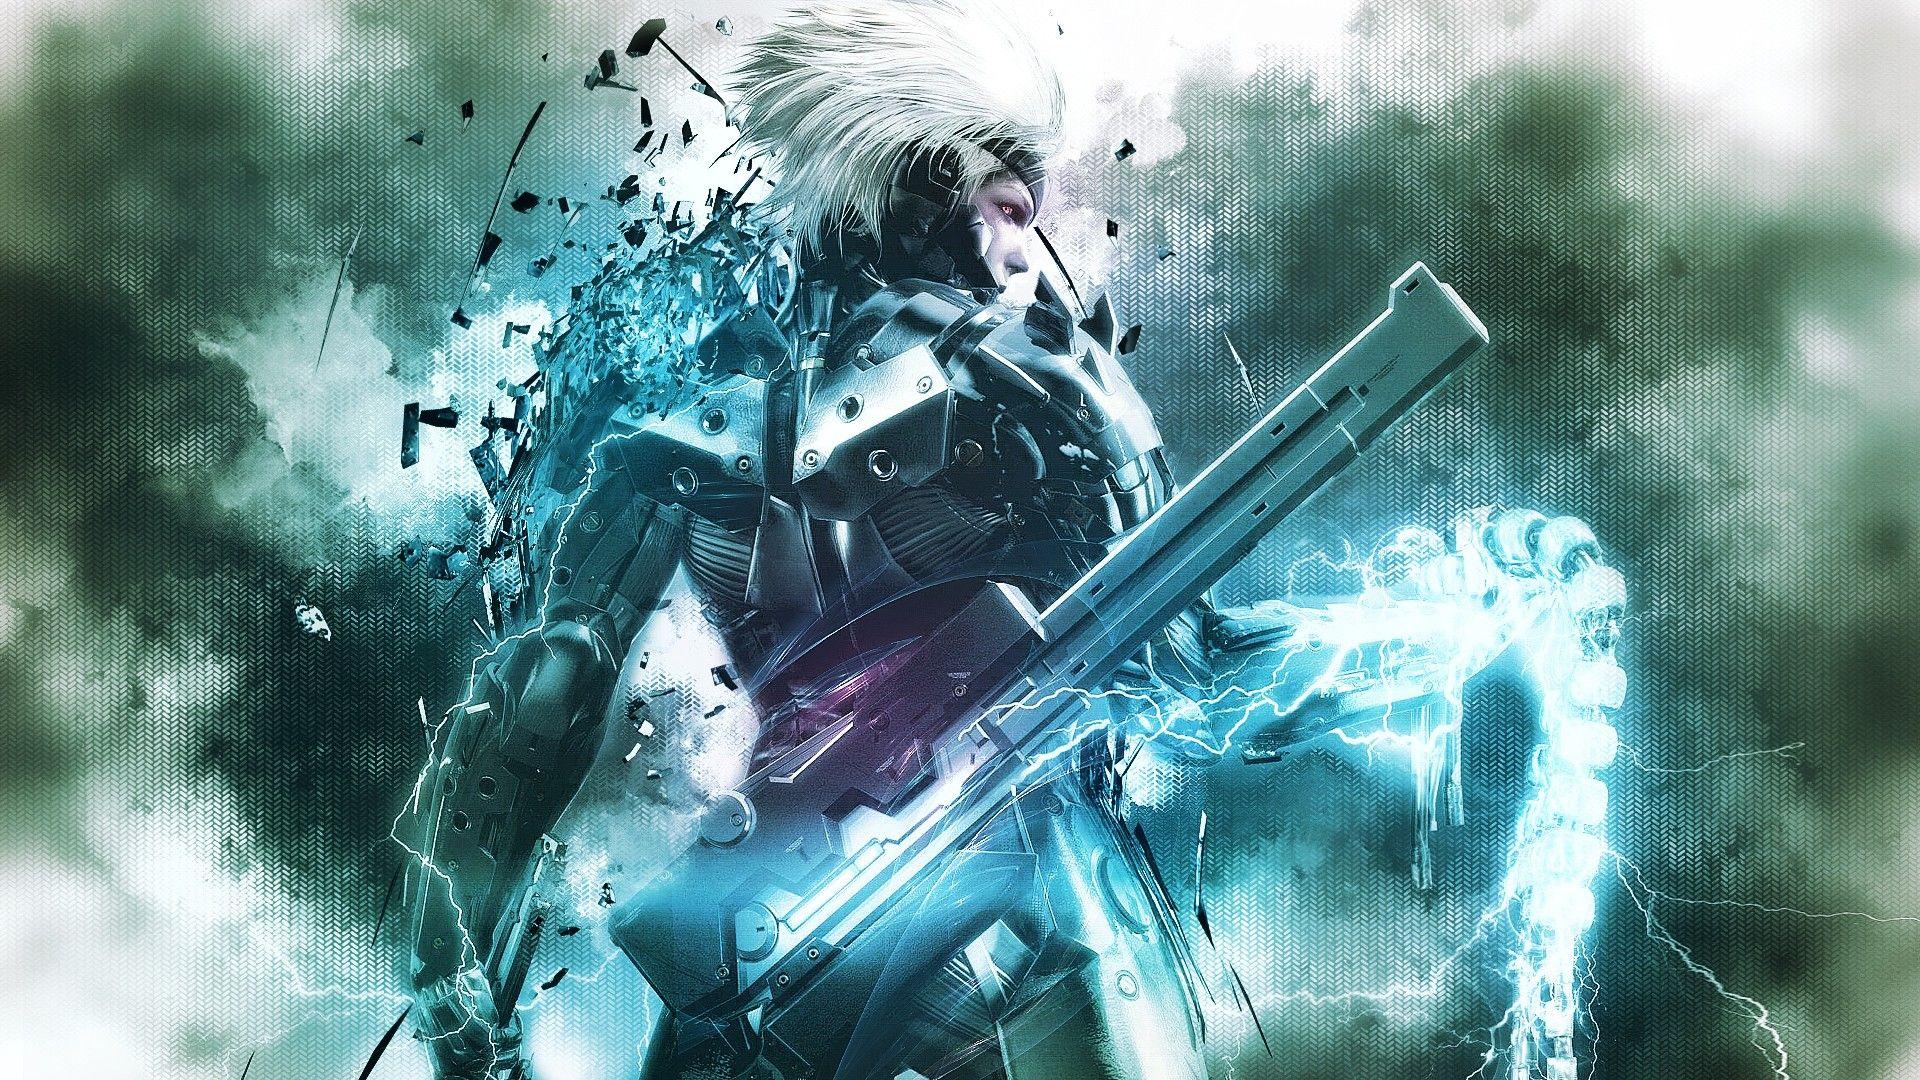 HD Raiden Wallpaper and Photo, 1920x1080 px, By Emelina Roberge